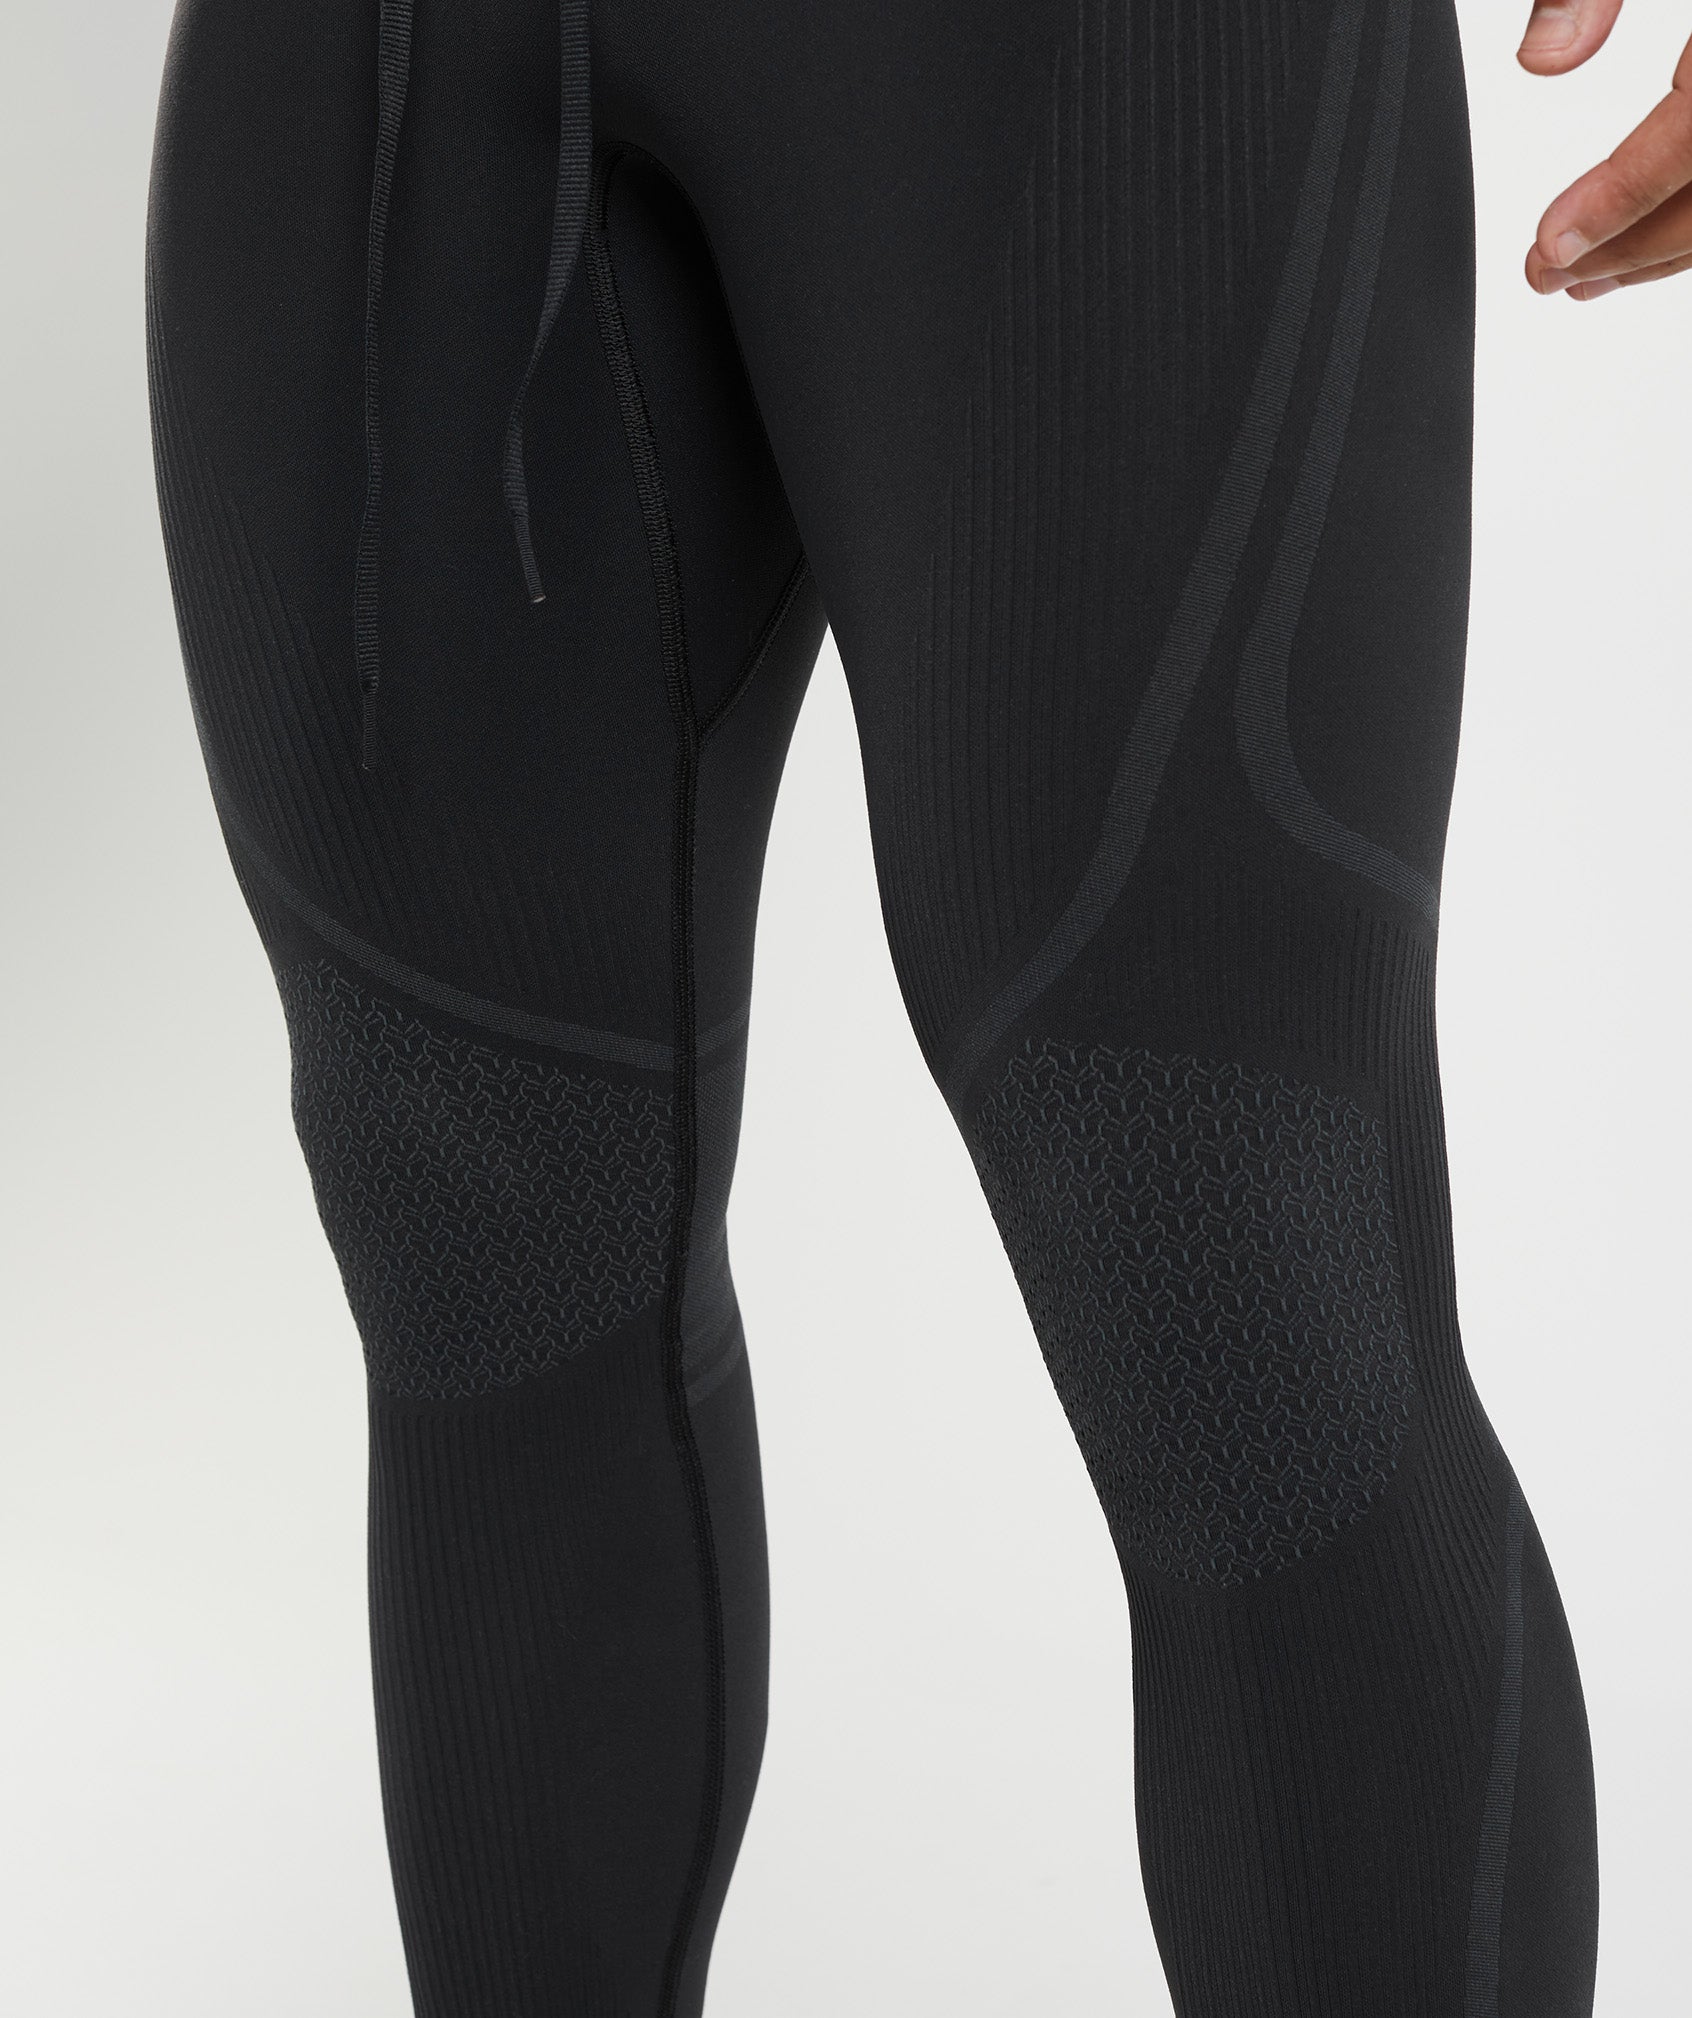 315 Seamless Tights in Black/Charcoal Grey - view 5